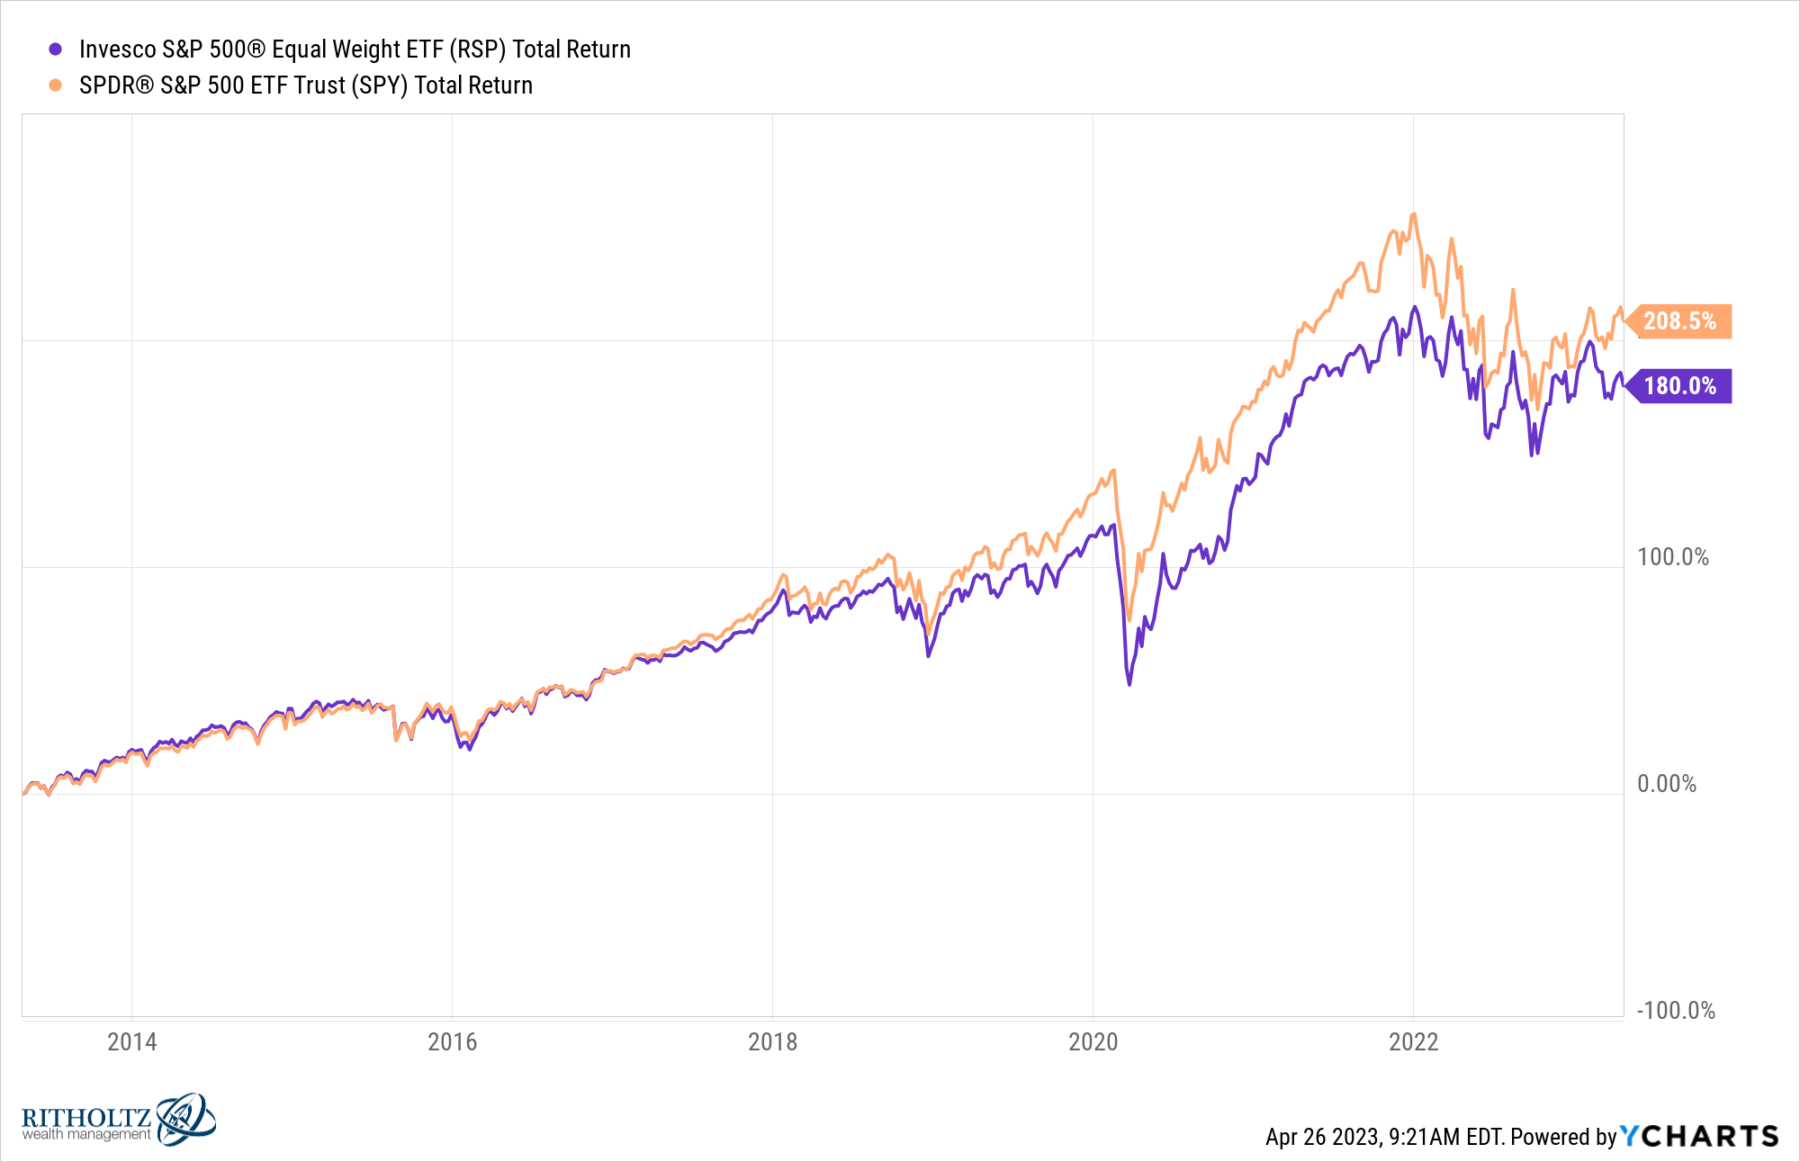 What Does the Relative Performance of Equal Weight S&P500 Mean? 9